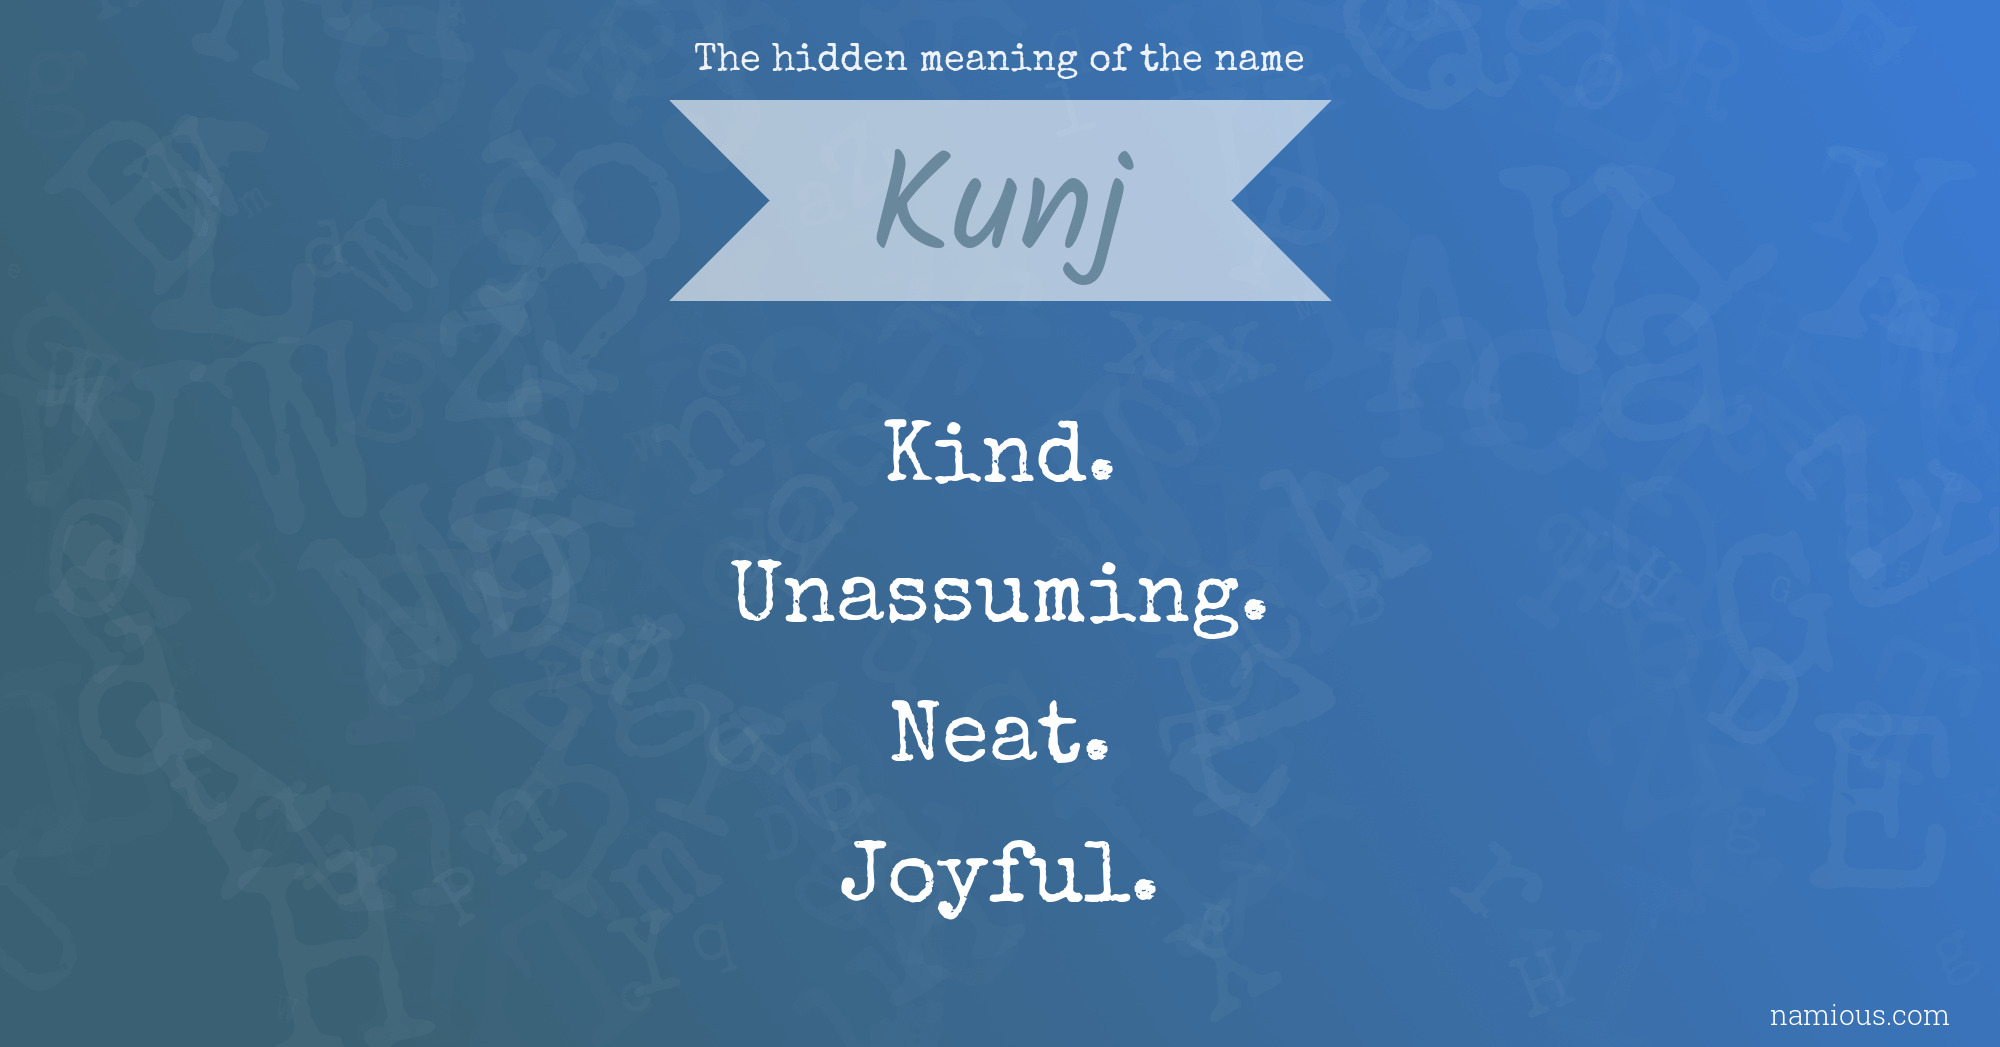 The hidden meaning of the name Kunj